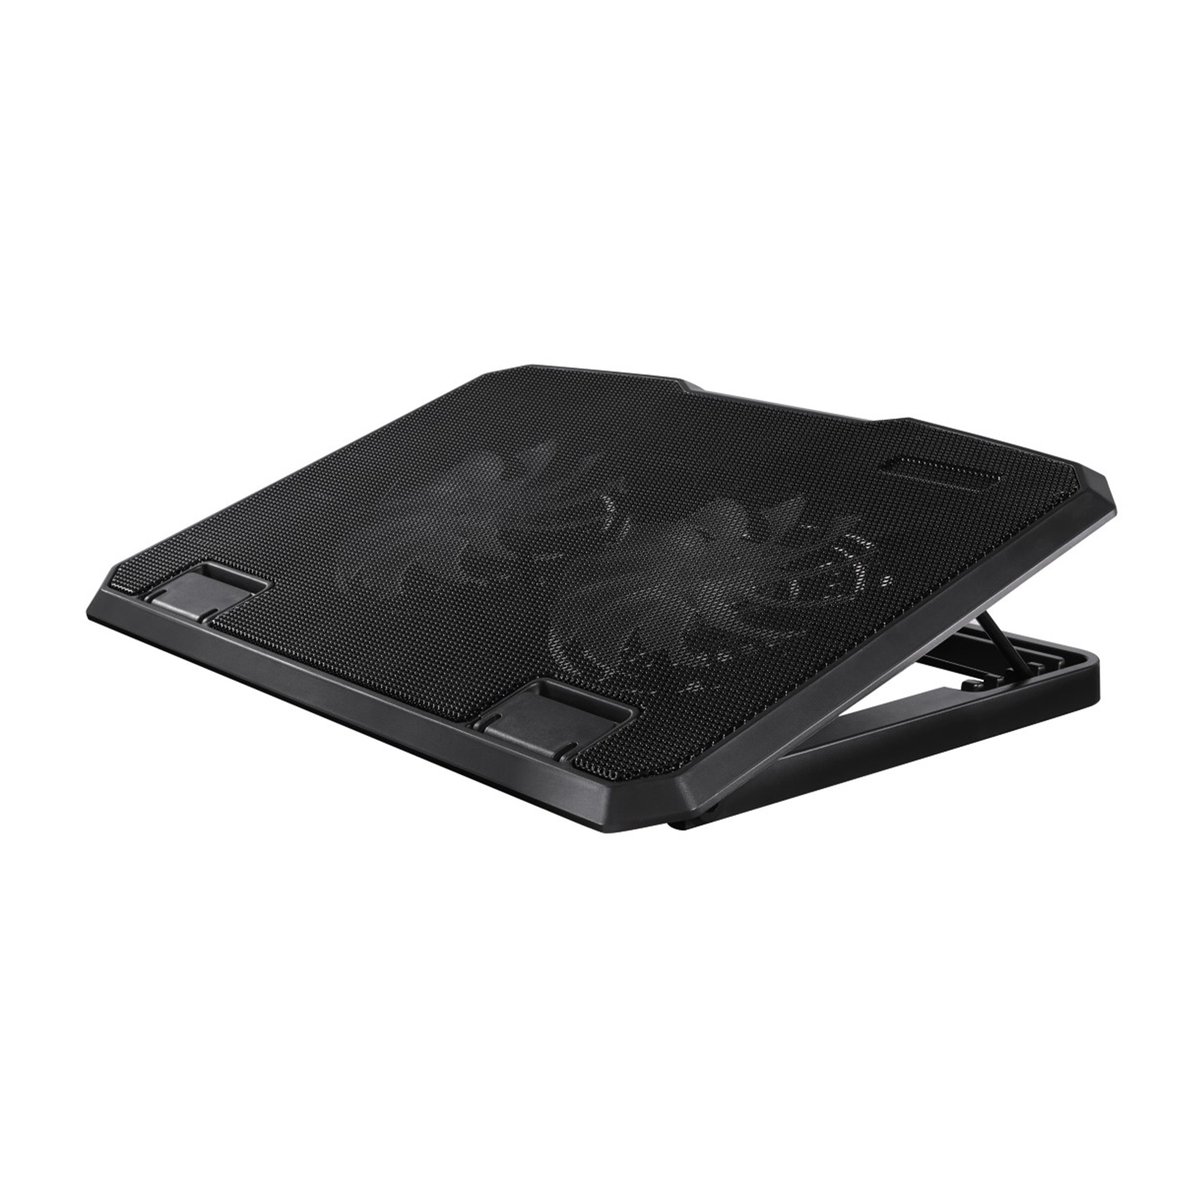 Hama Notebook Cooling Pad-53065